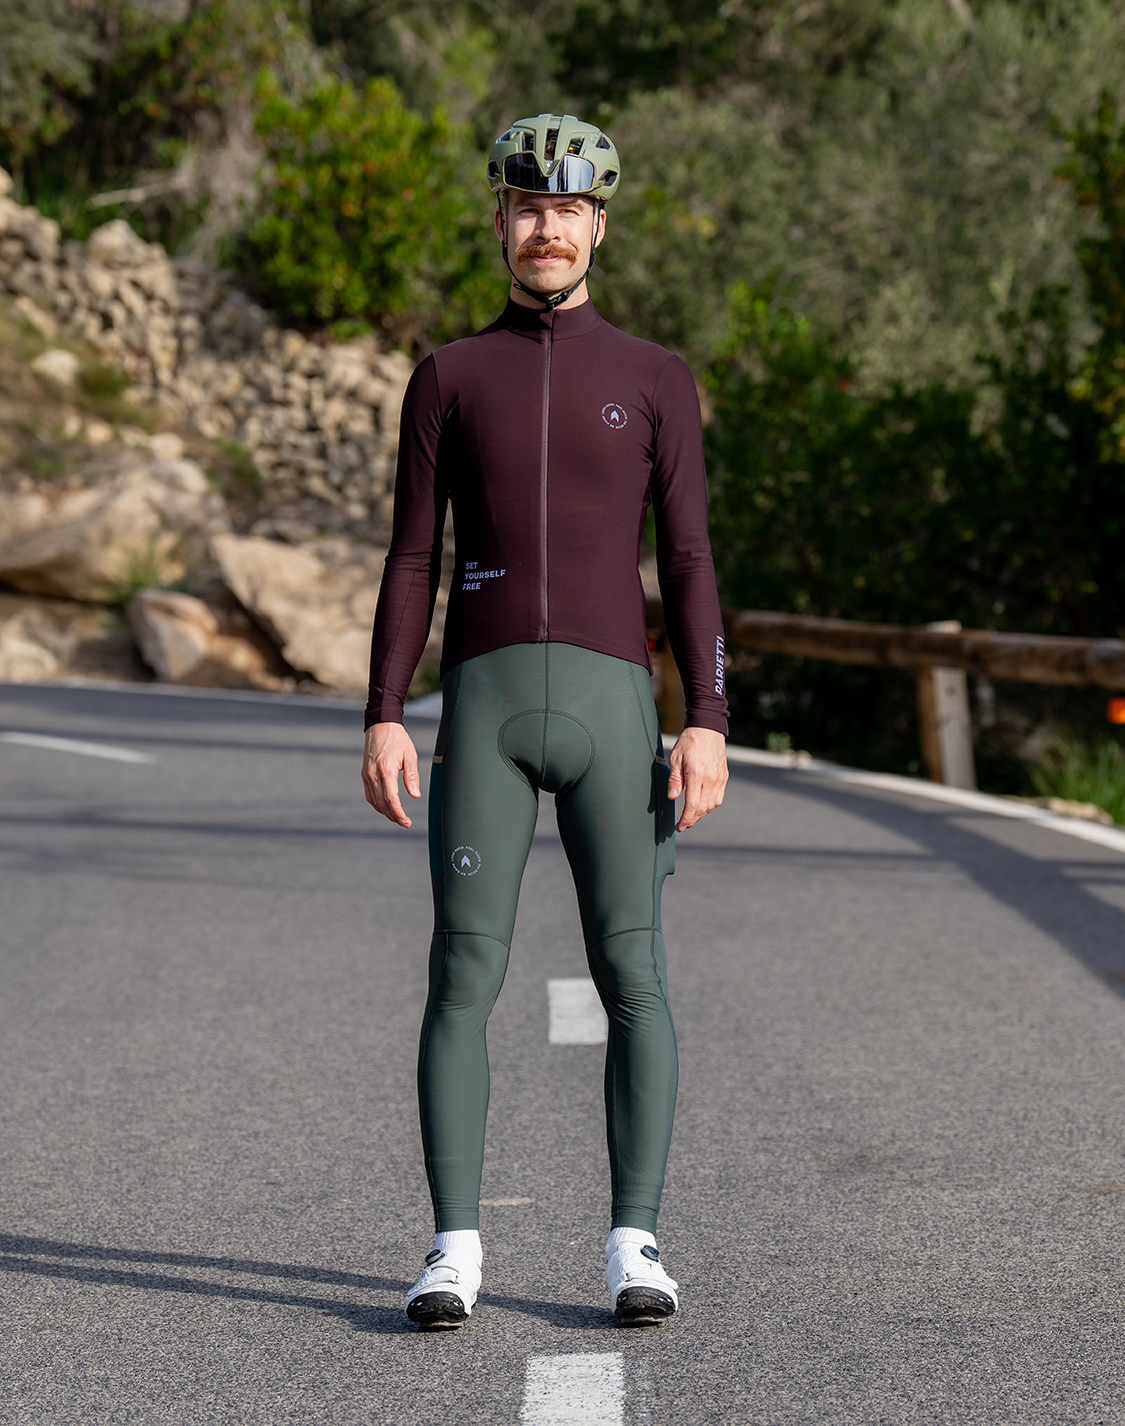 Men's Freeride Thermal Bib Tights — Ash Forest